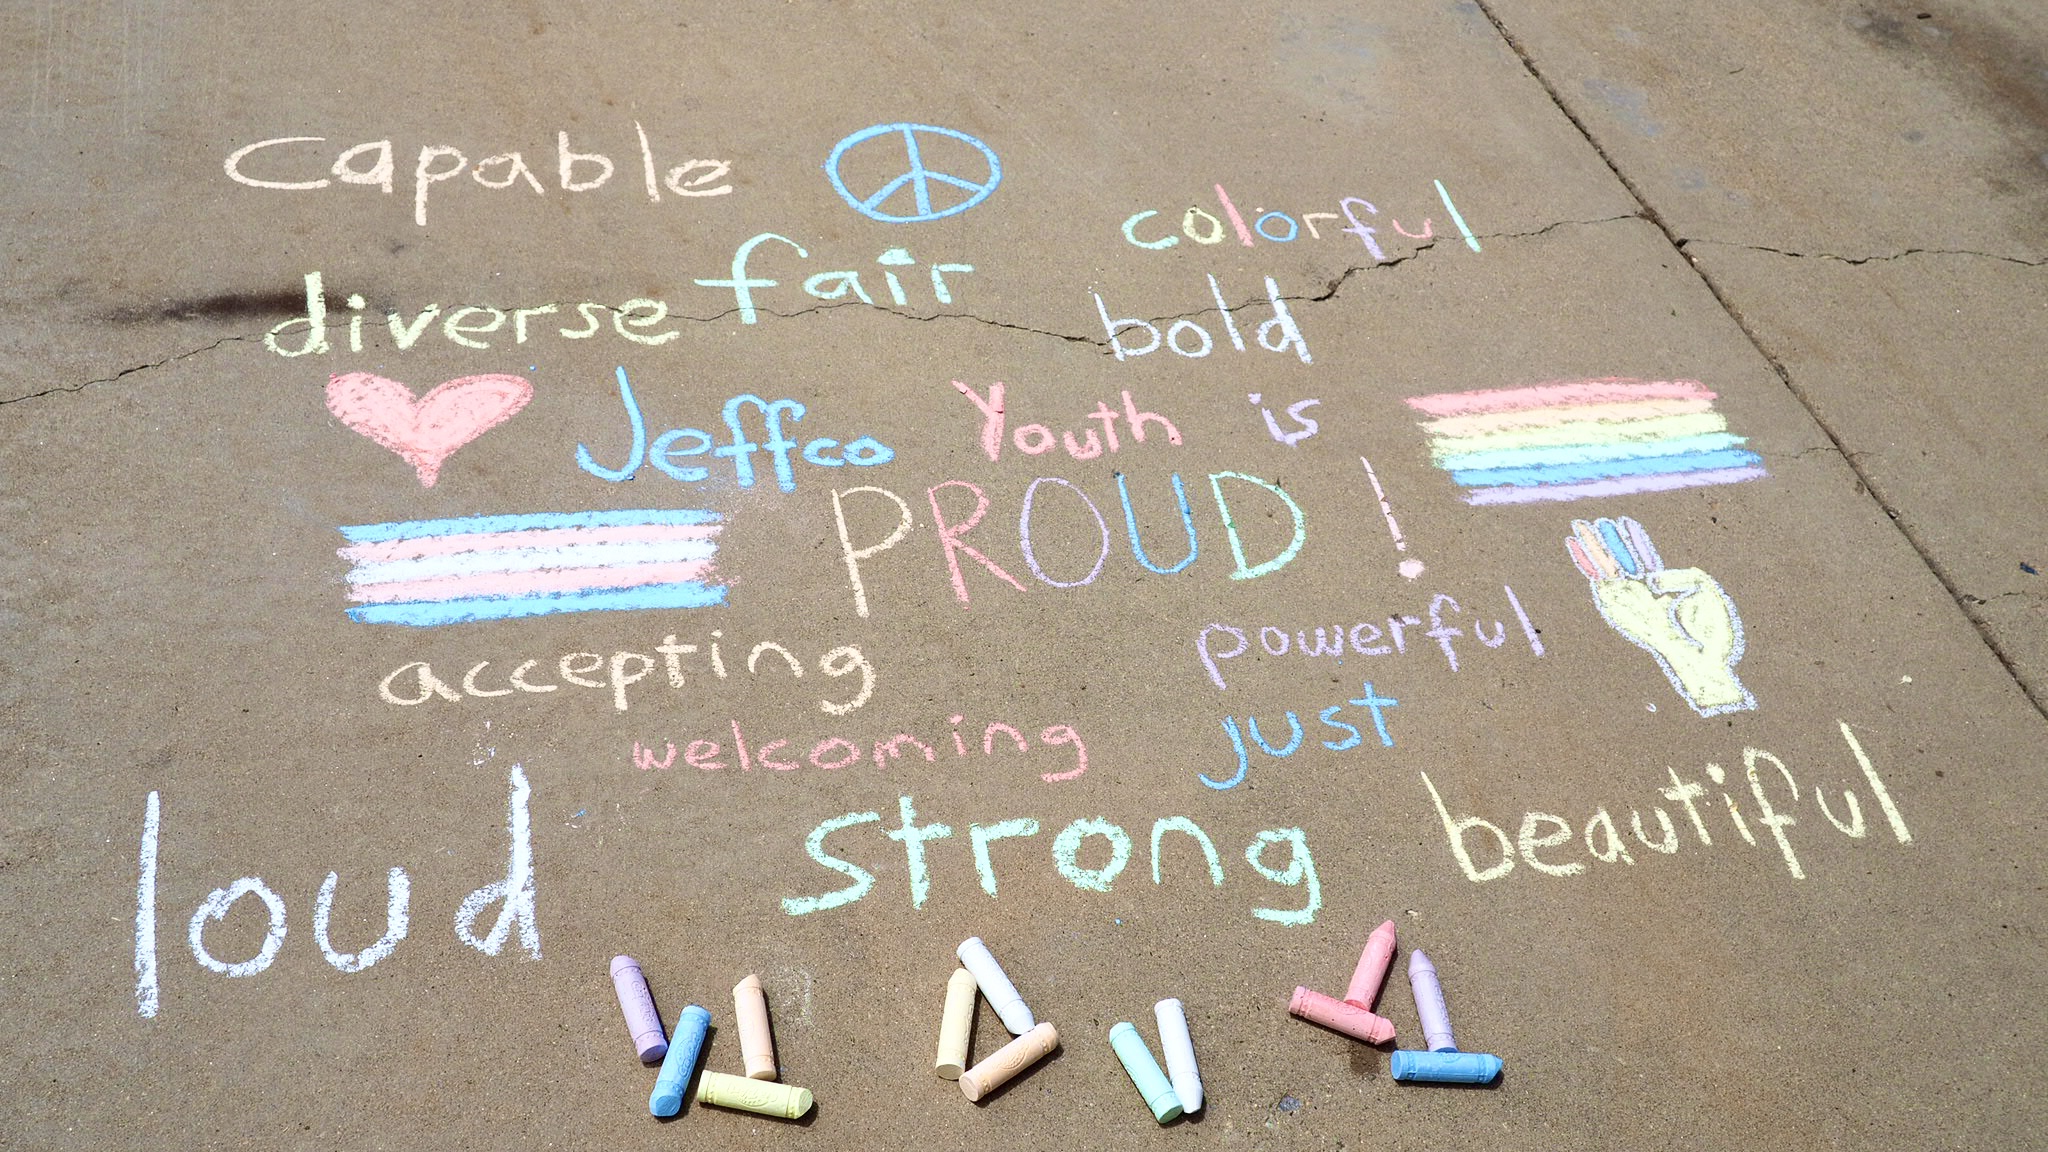 Words in multiple colors drawn in chalk on the sidewalk including: capable and diverse.